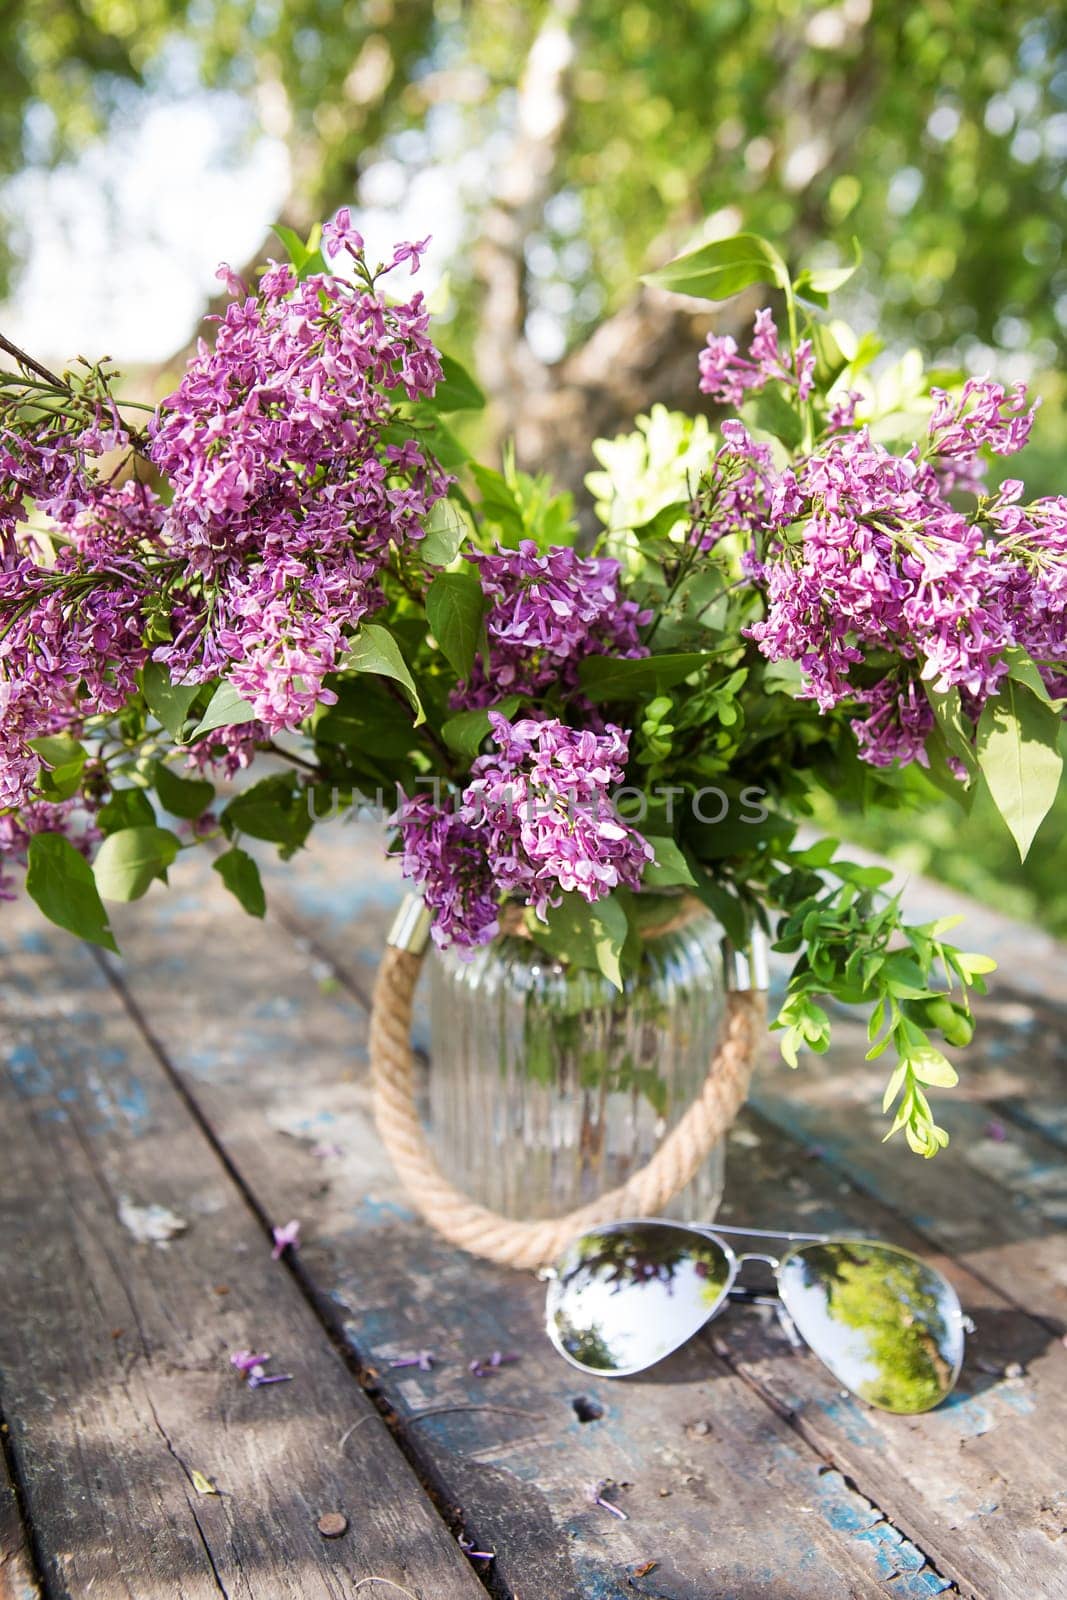 sunglasses and a beautiful bouquet of lilacs on an old table.